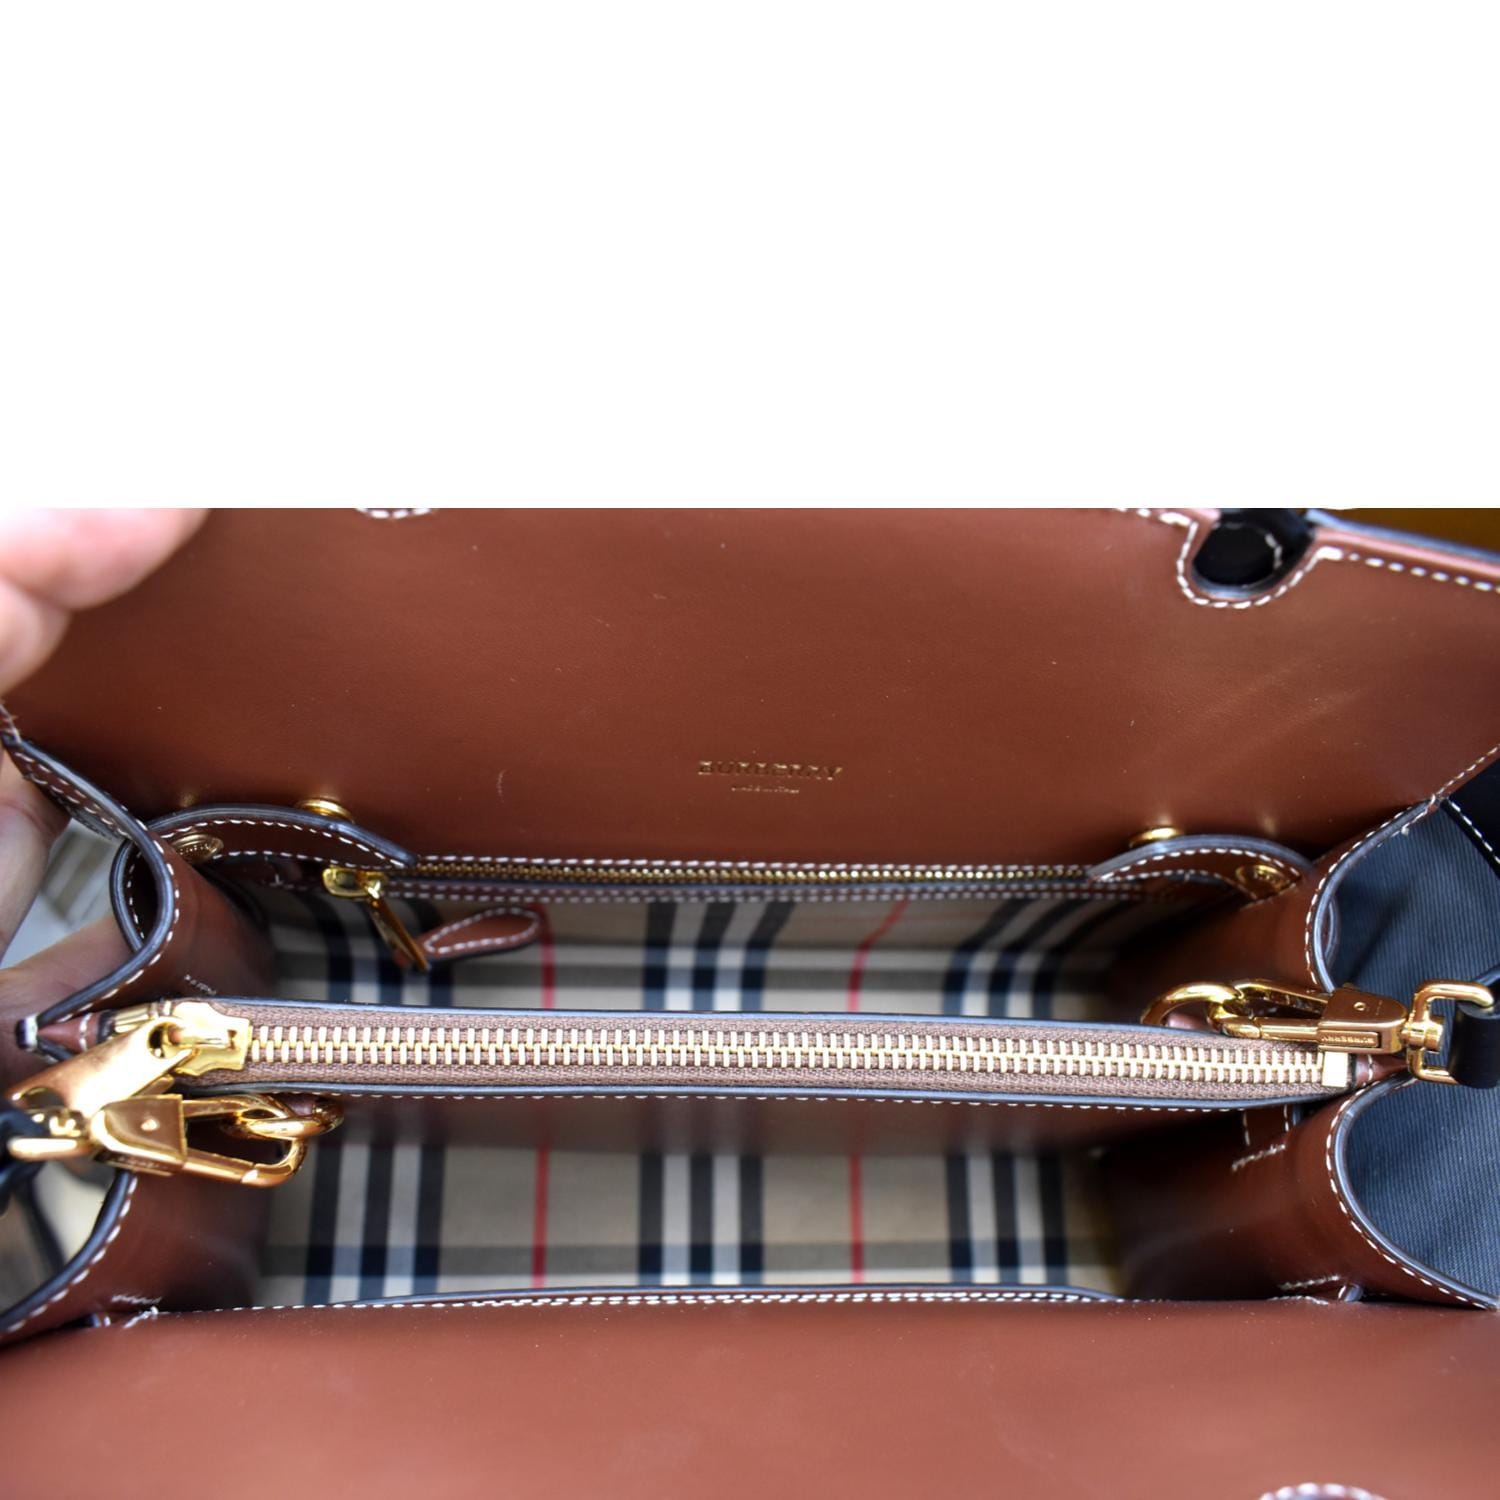 Burberry, Bags, Authentic Burberry Bag In Mint Condition